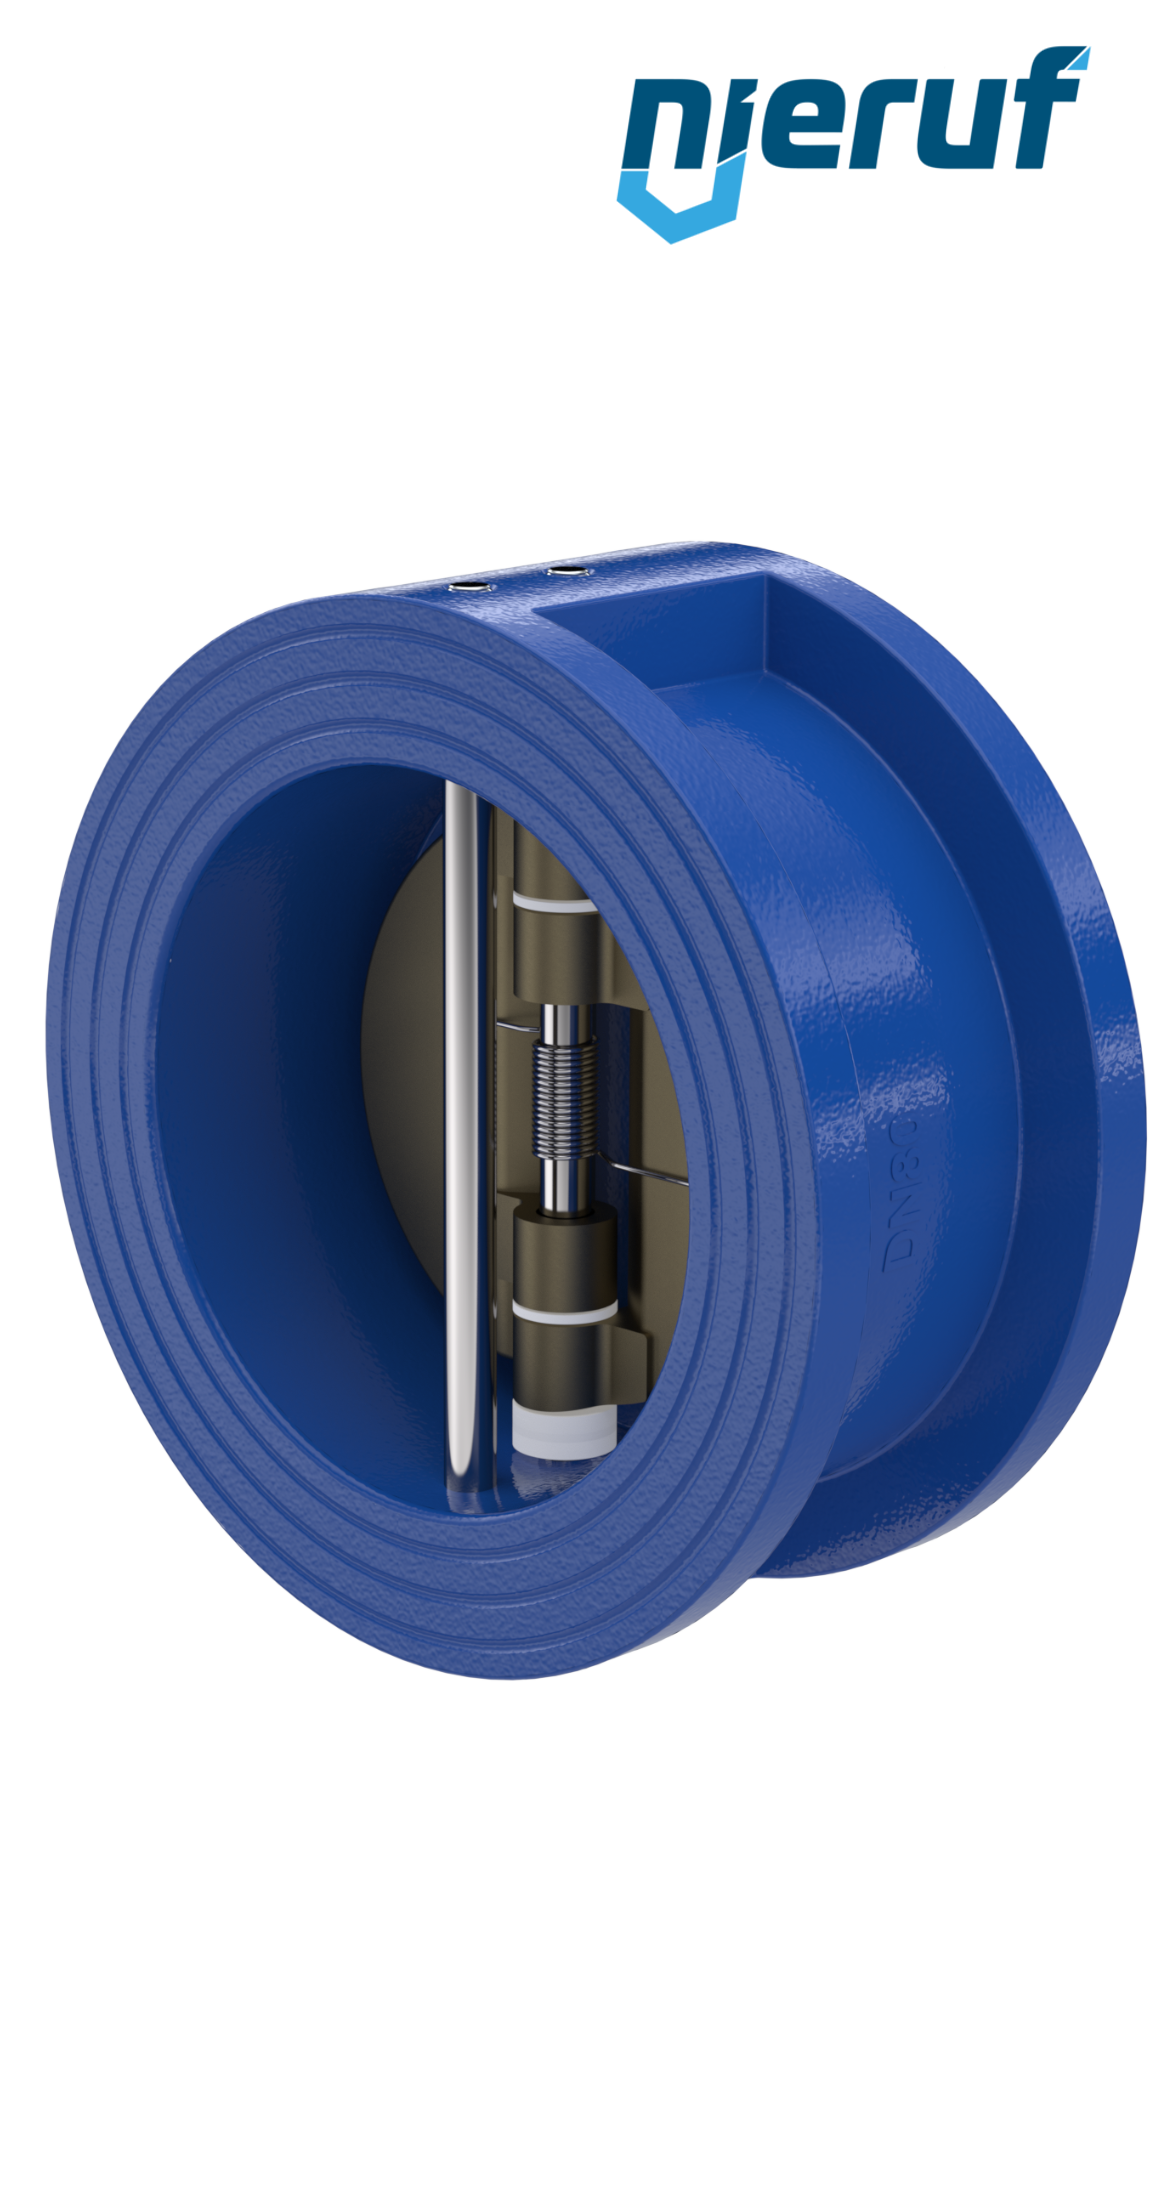 dual plate check valve DN80 DR04 GGG40 epoxyd plated blue 180µm FKM